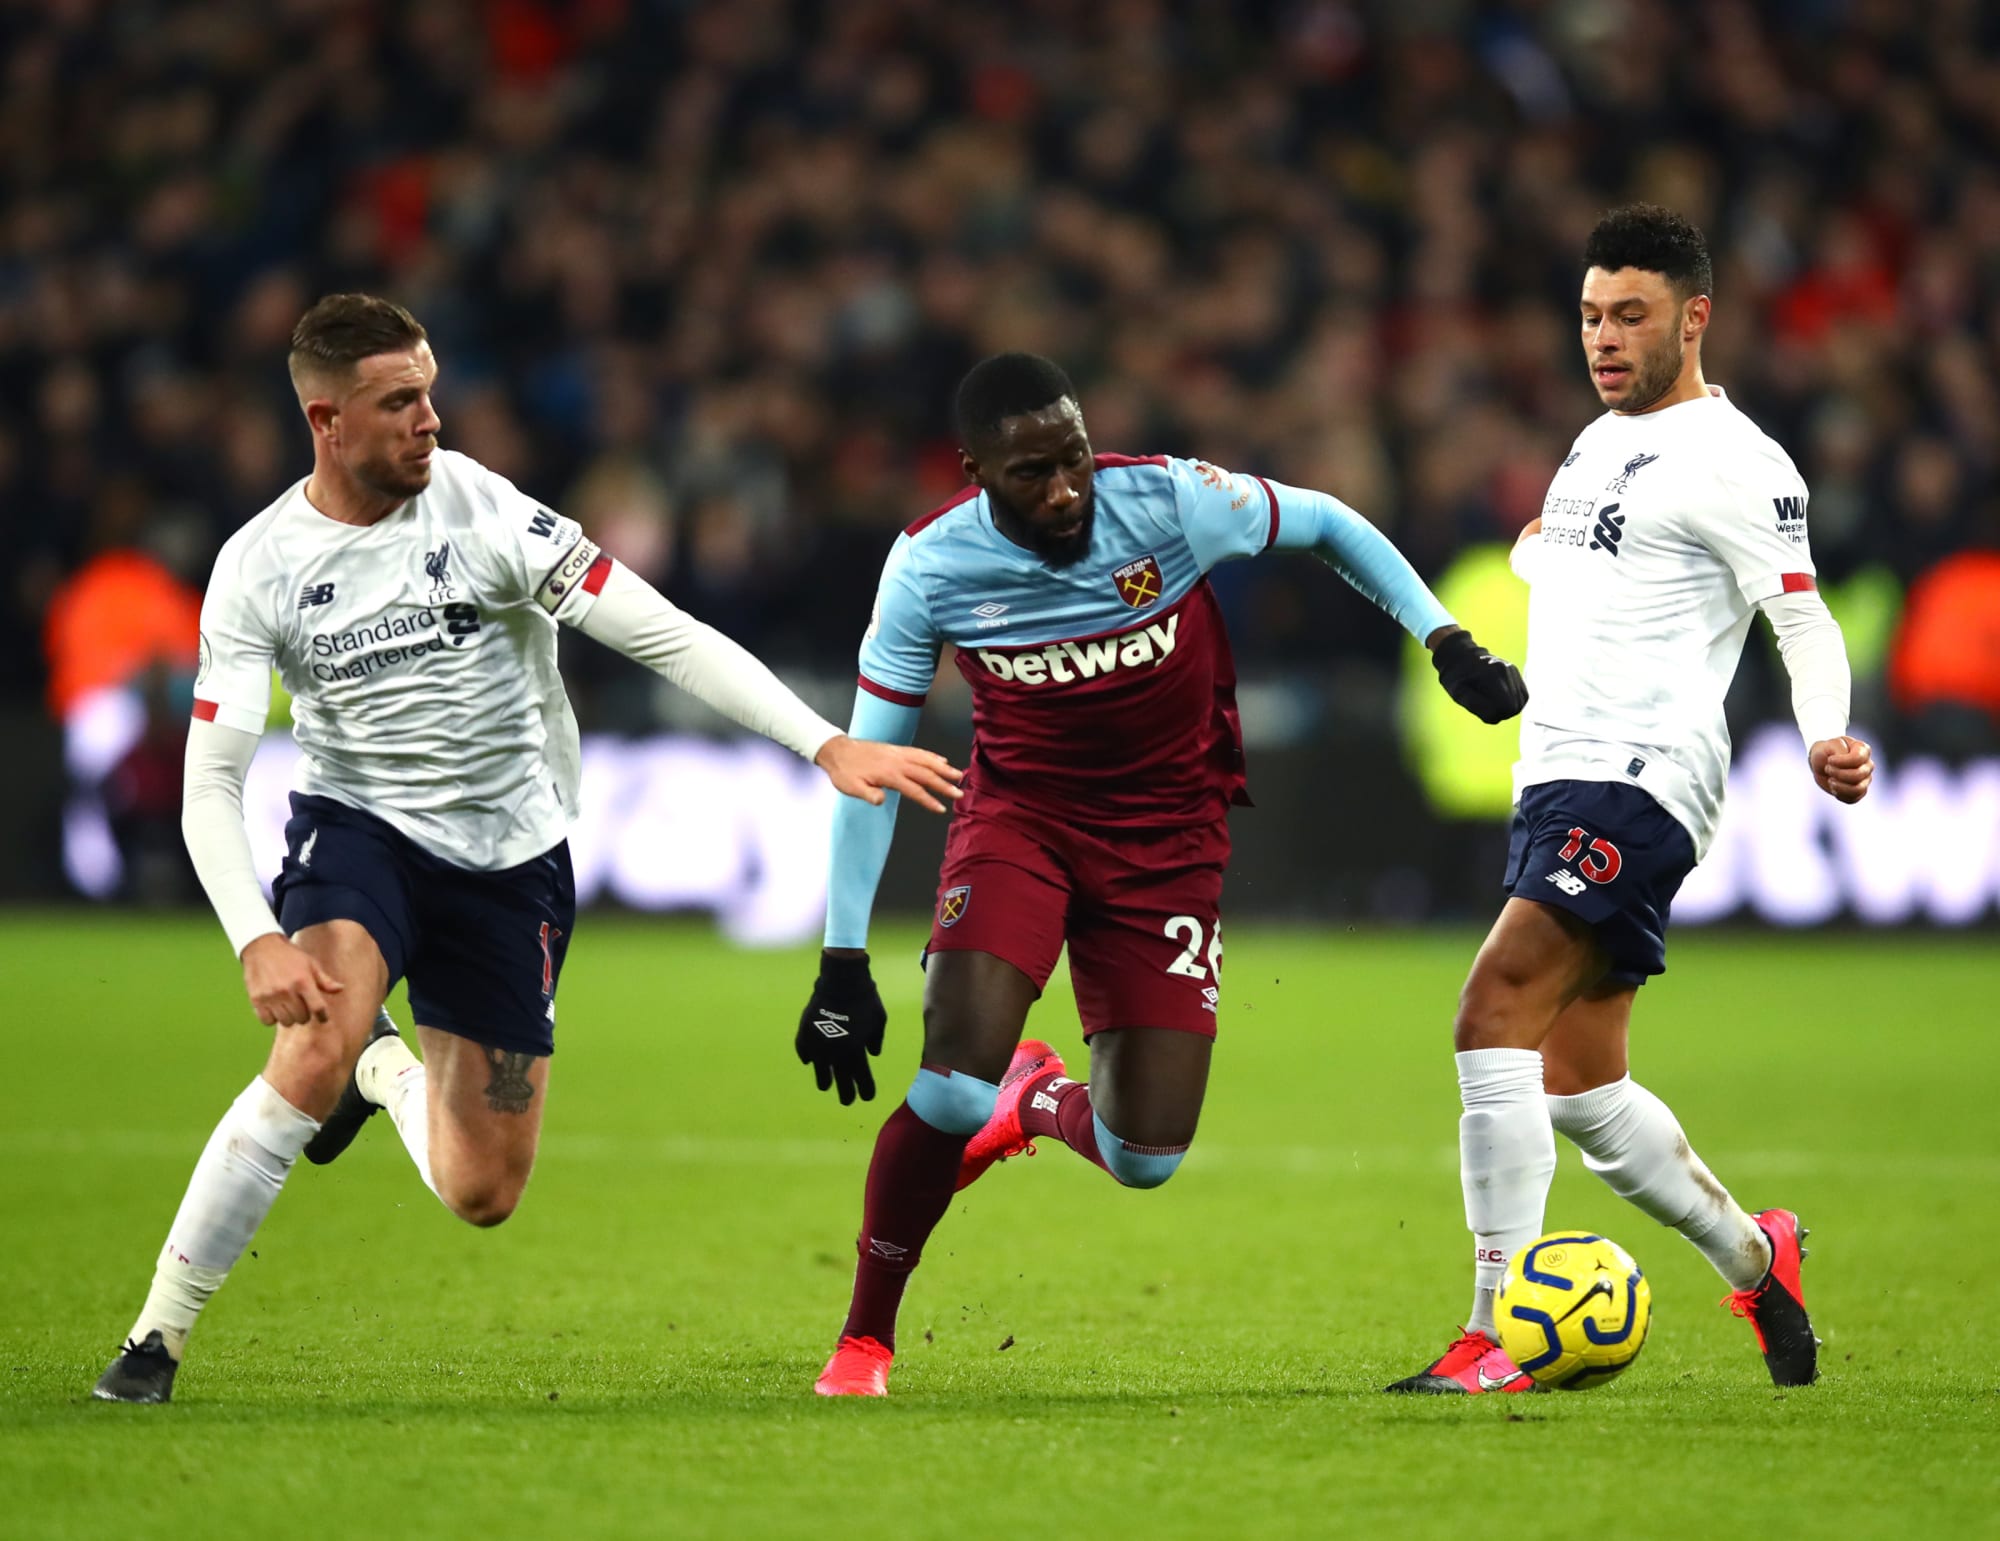 Liverpool vs West Ham live stream: Watch the game for free here